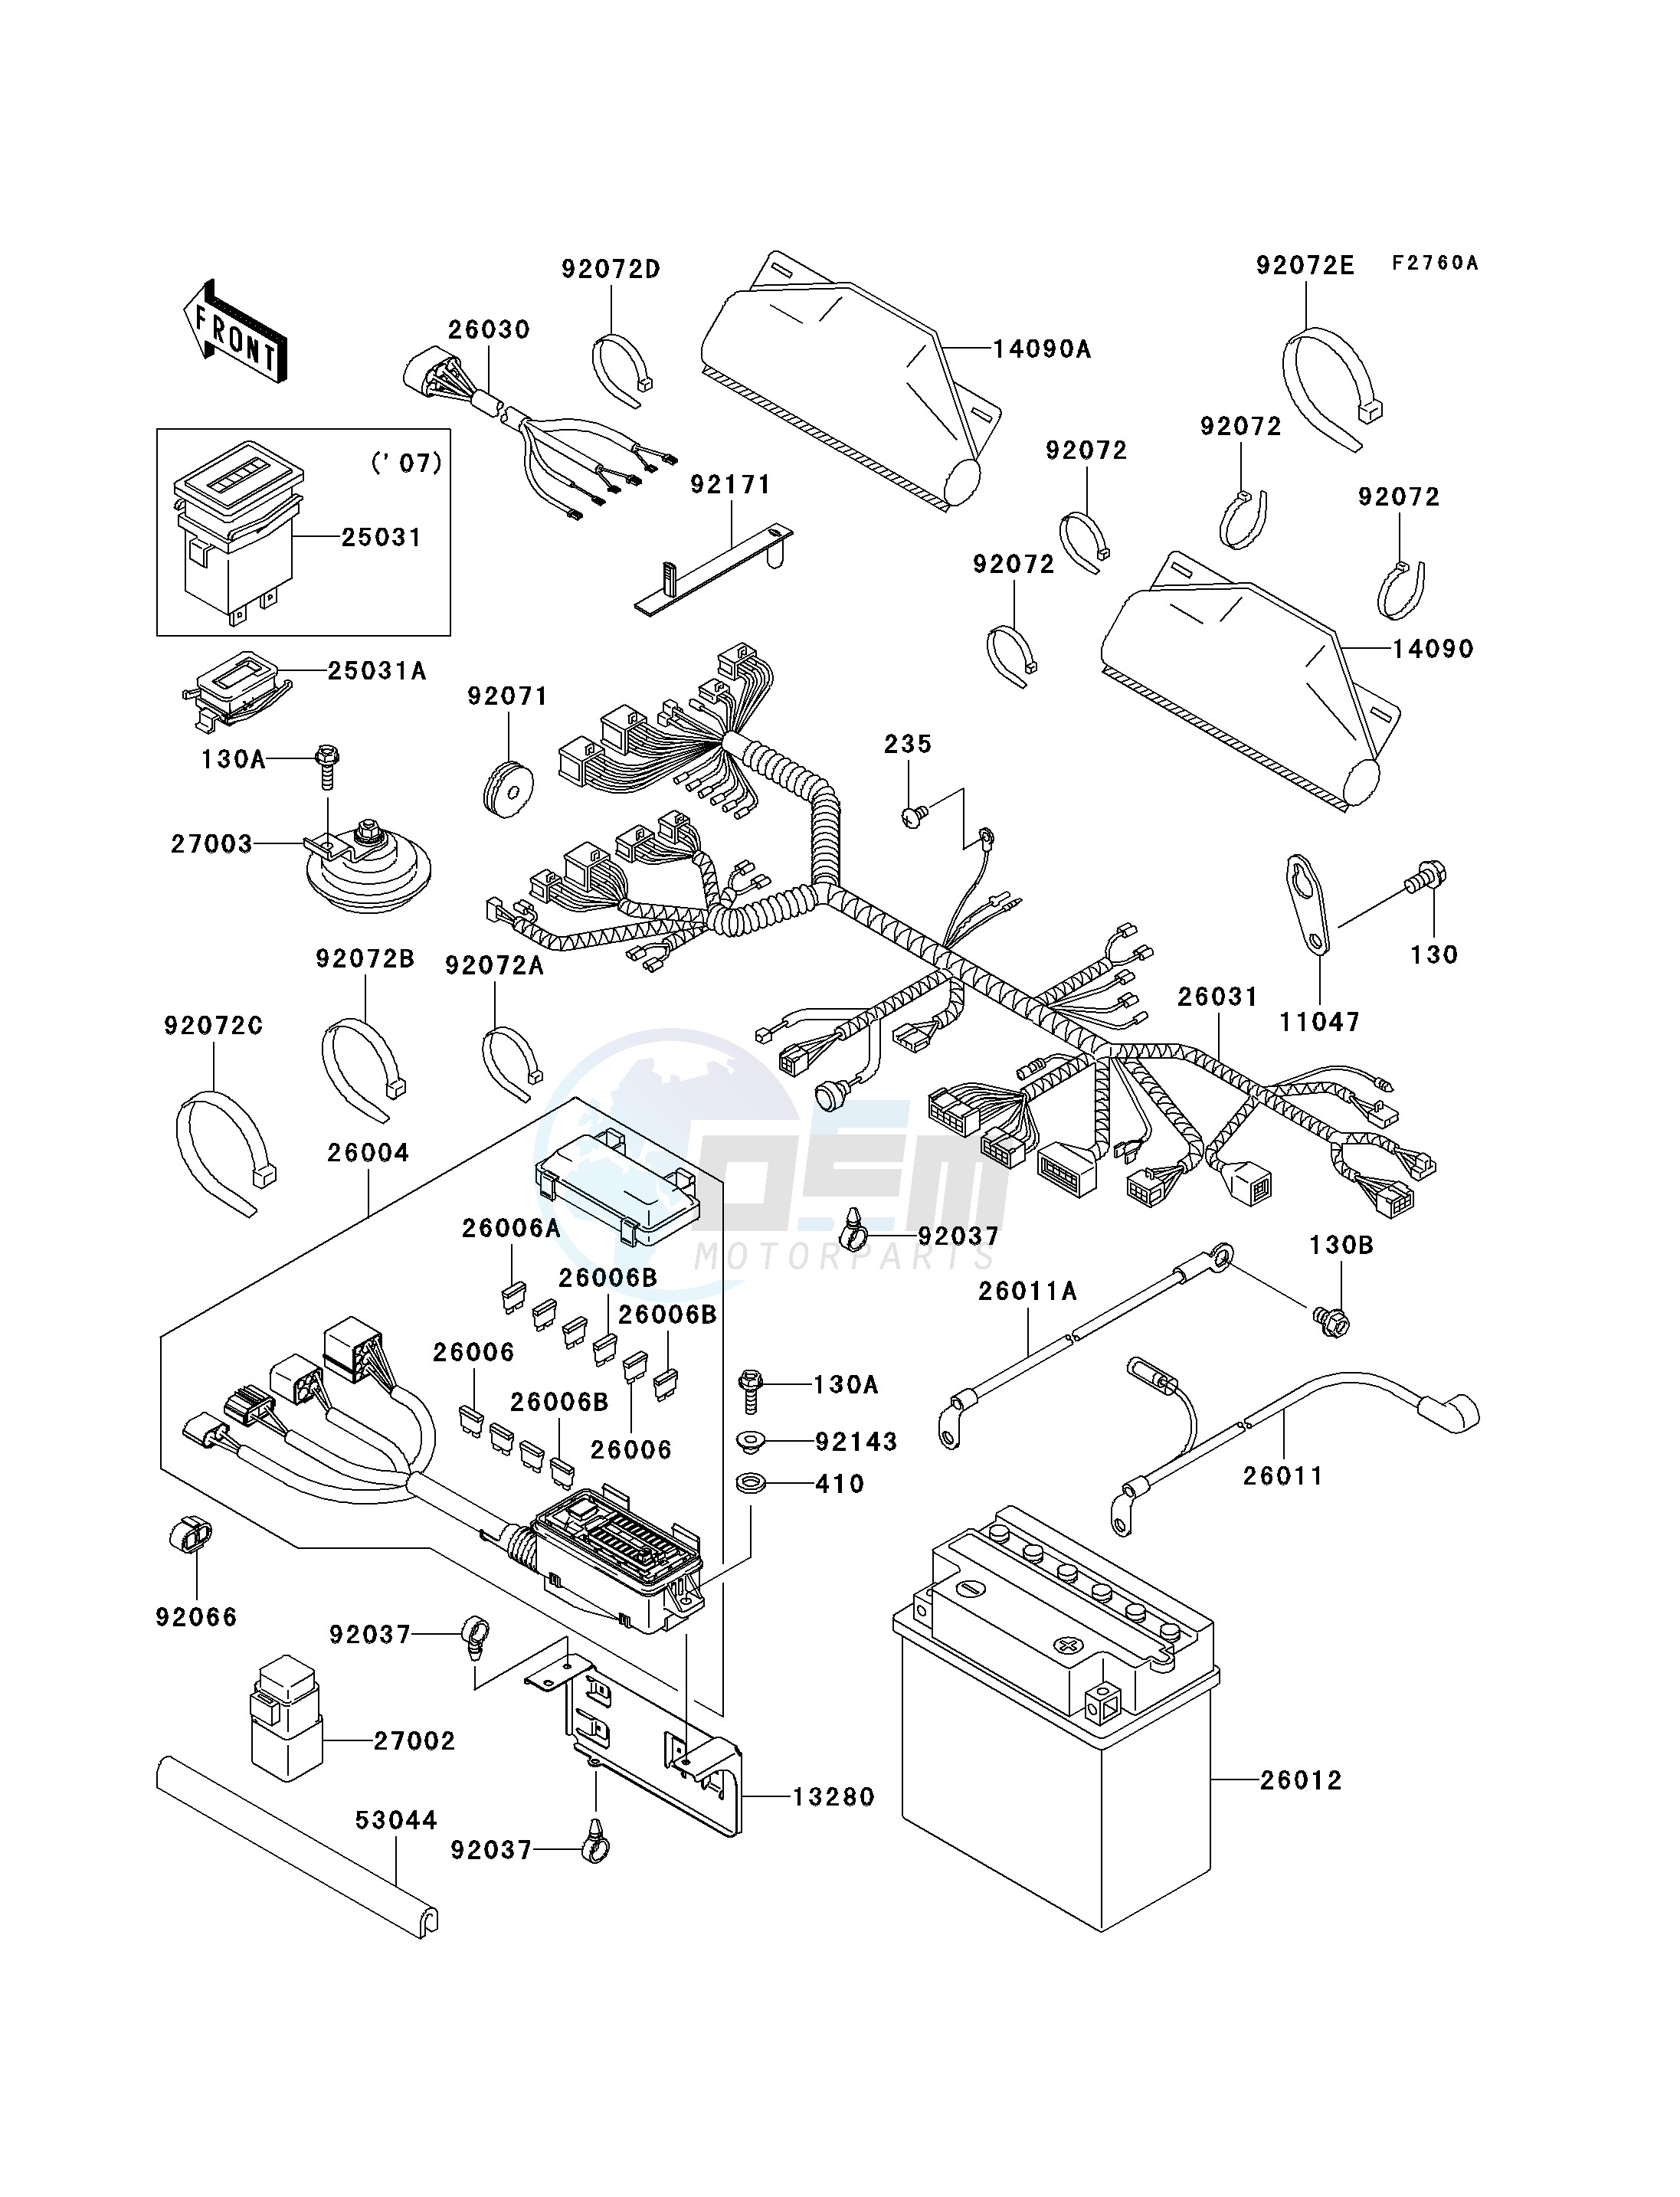 CHASSIS ELECTRICAL EQUIPMENT-- G7F_G8F- - blueprint